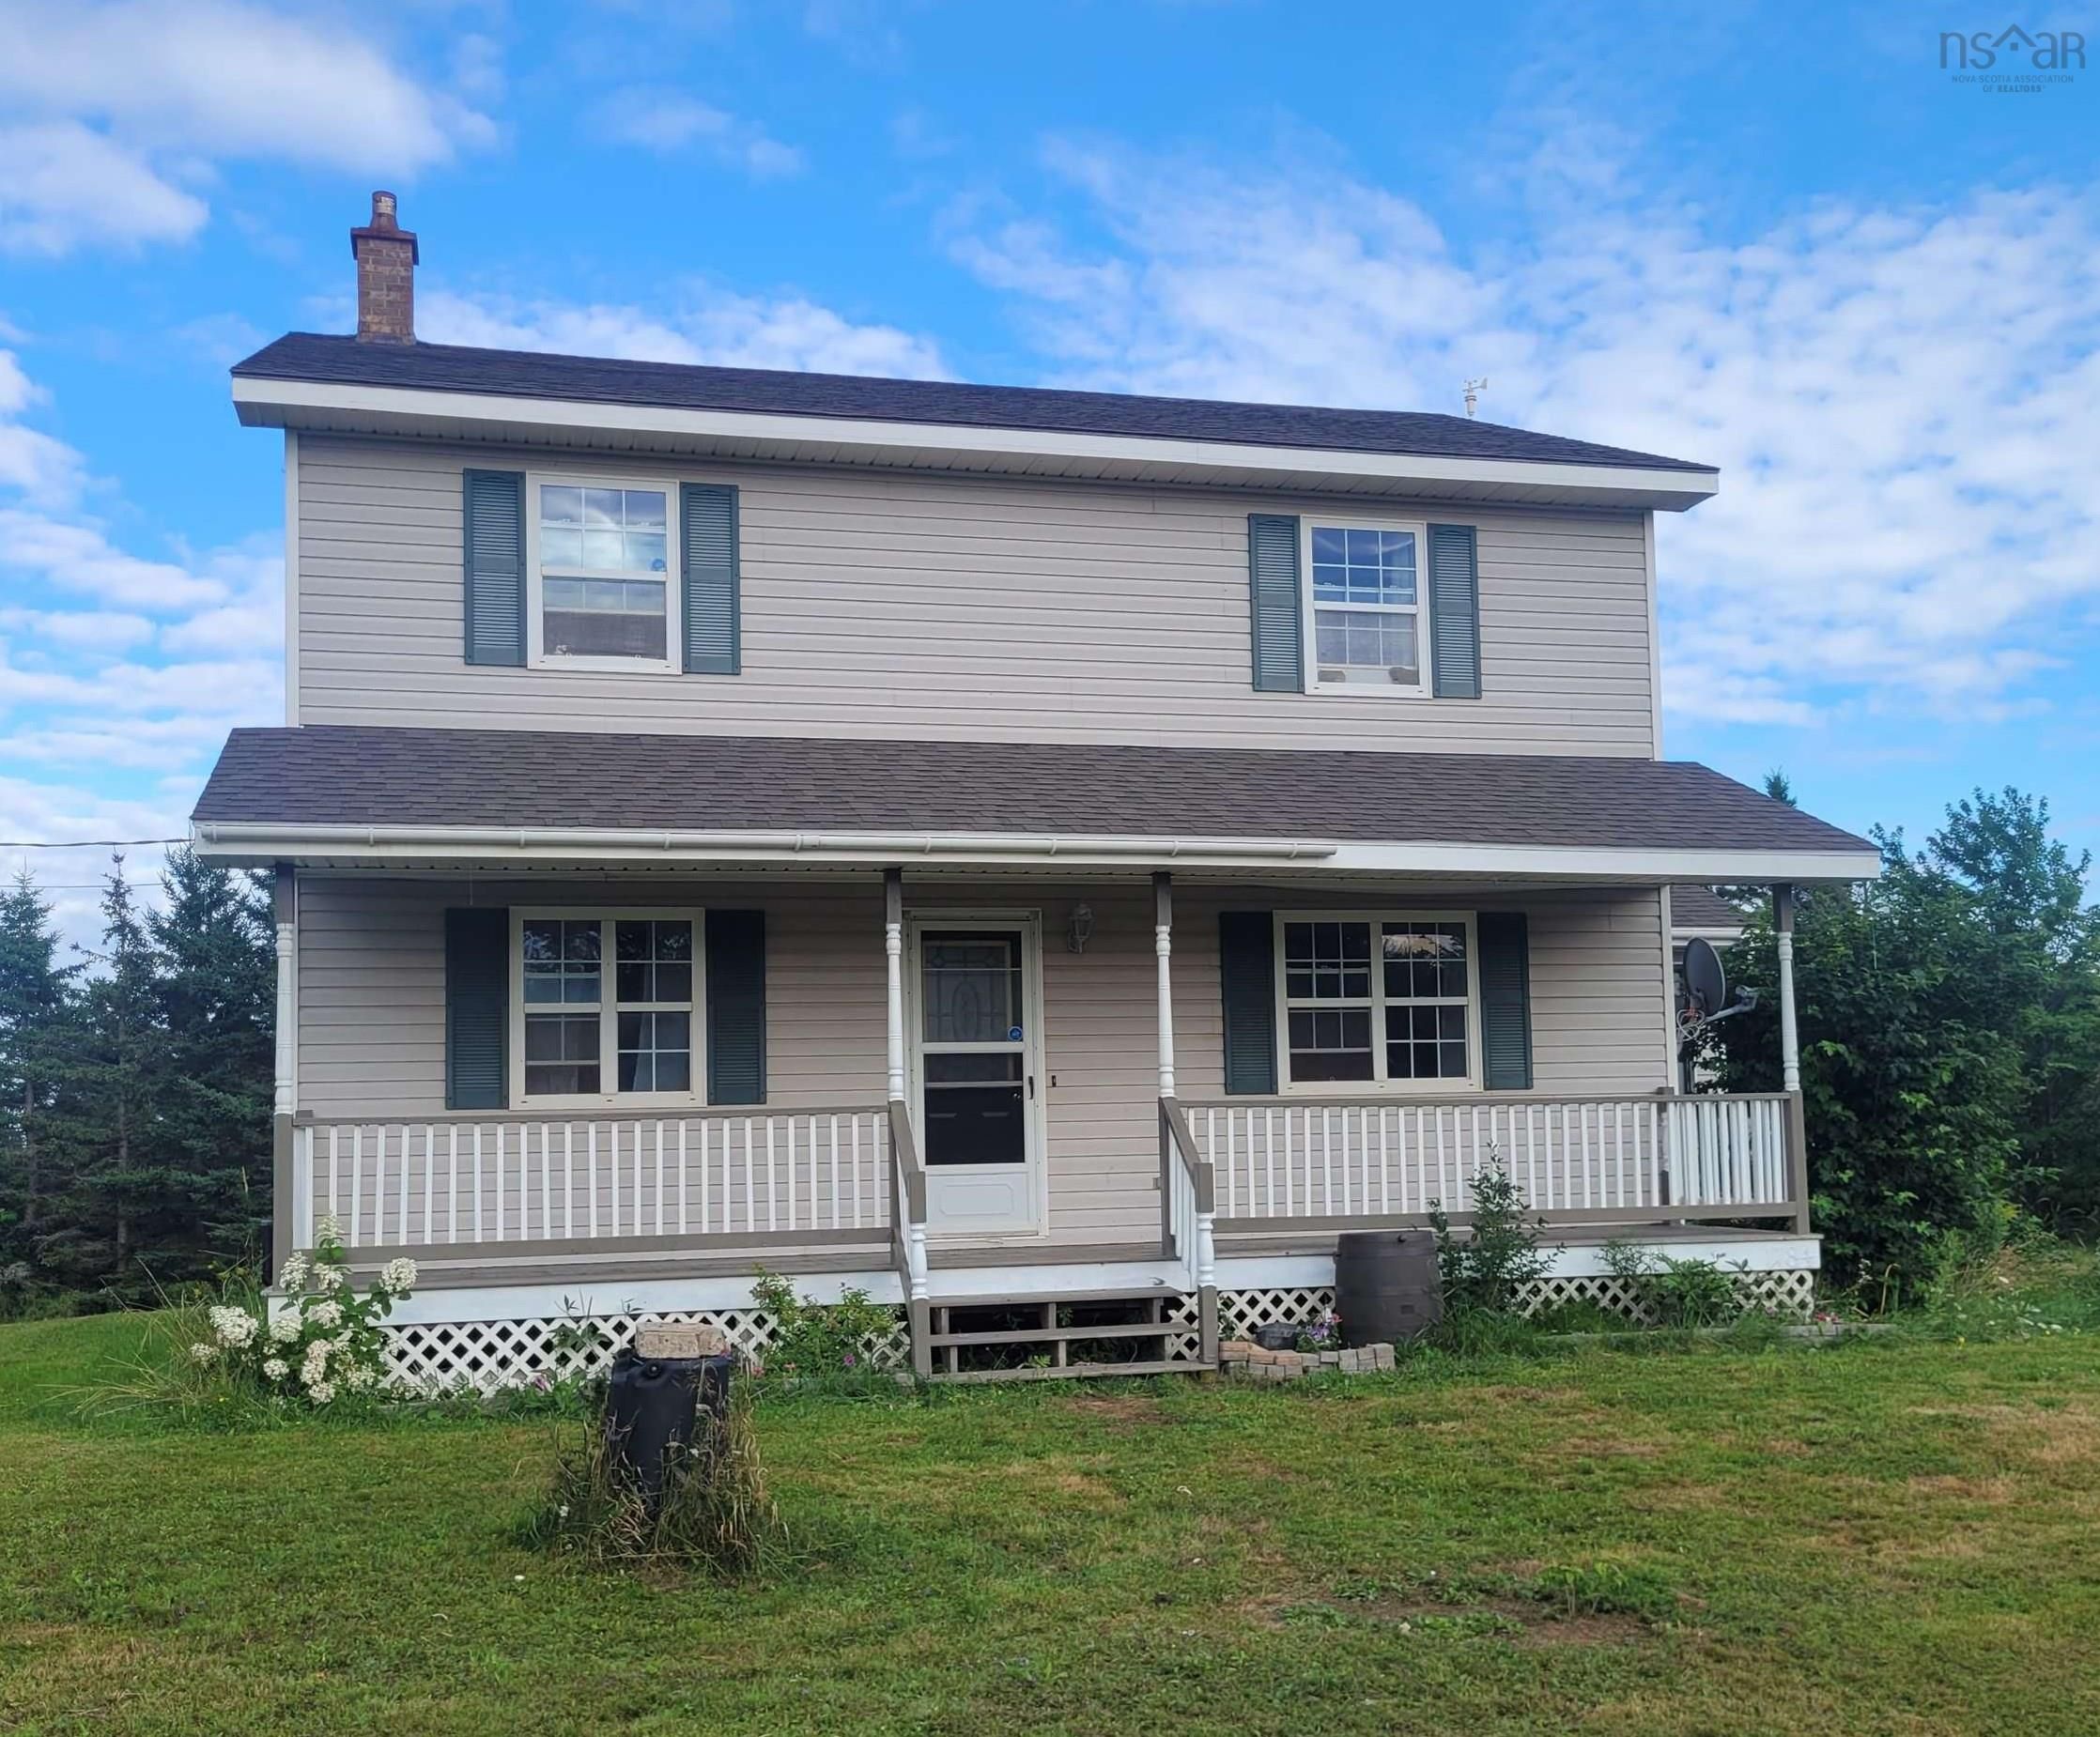 Main Photo: 1784 Toney River Road in Toney River: 108-Rural Pictou County Residential for sale (Northern Region)  : MLS®# 202219922